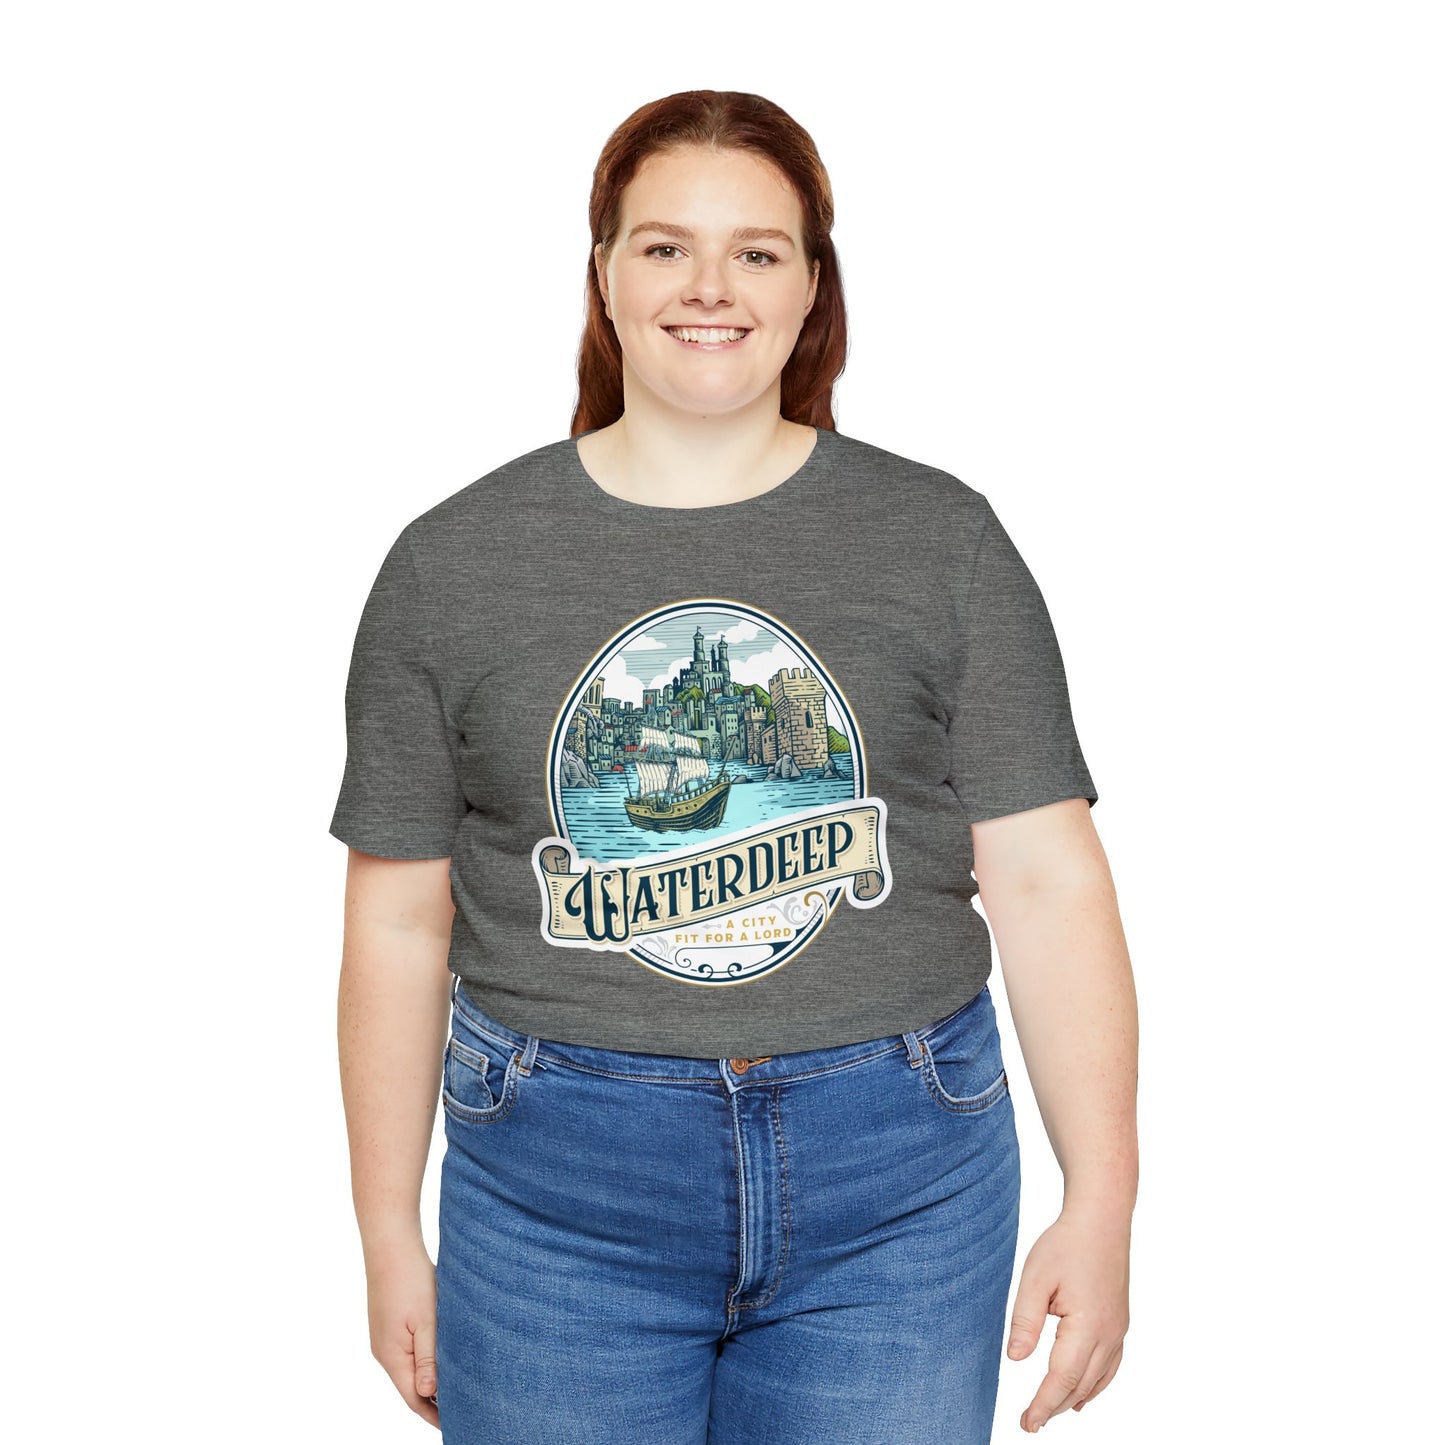 Waterdeep | Wish You Were Here Collection | Retail Fit Fantasy Geek Cotton T-shirt